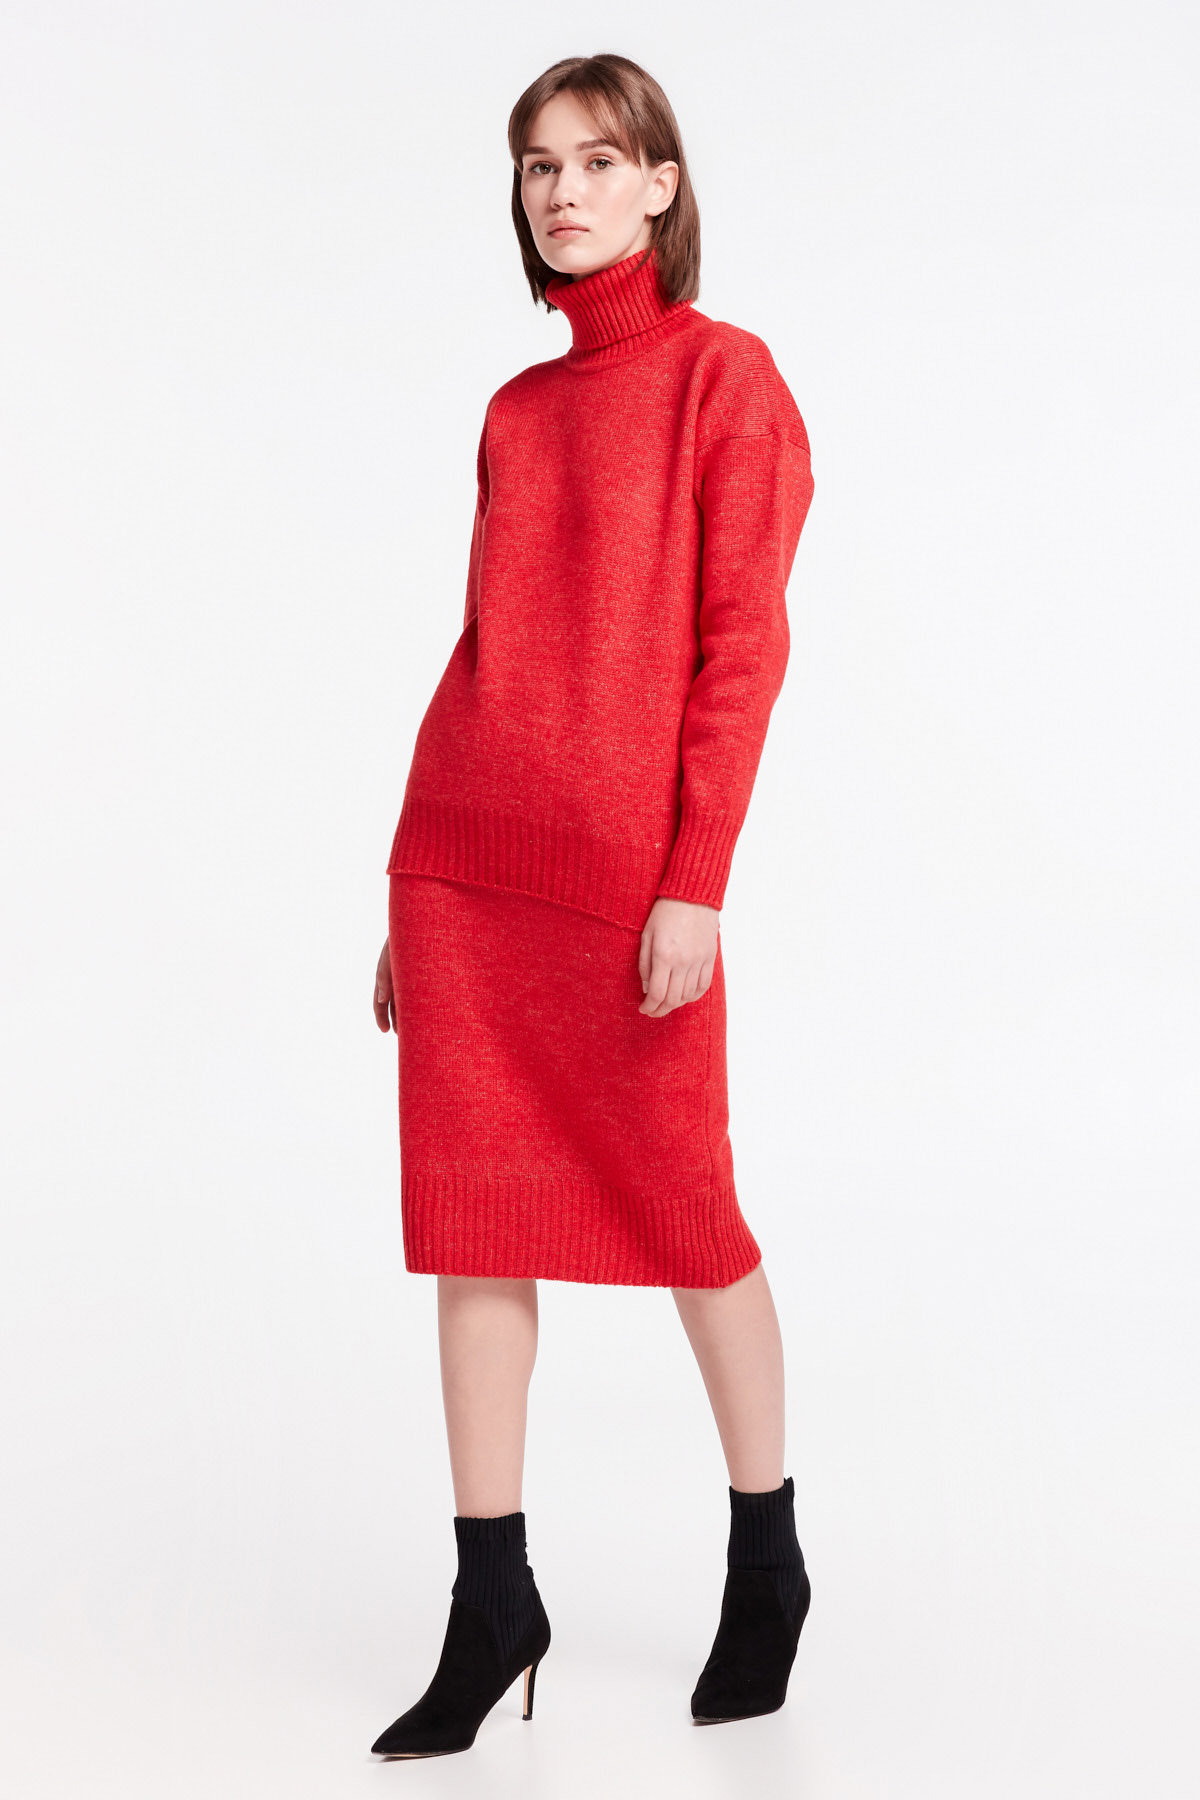 Red knit sweater, photo 3